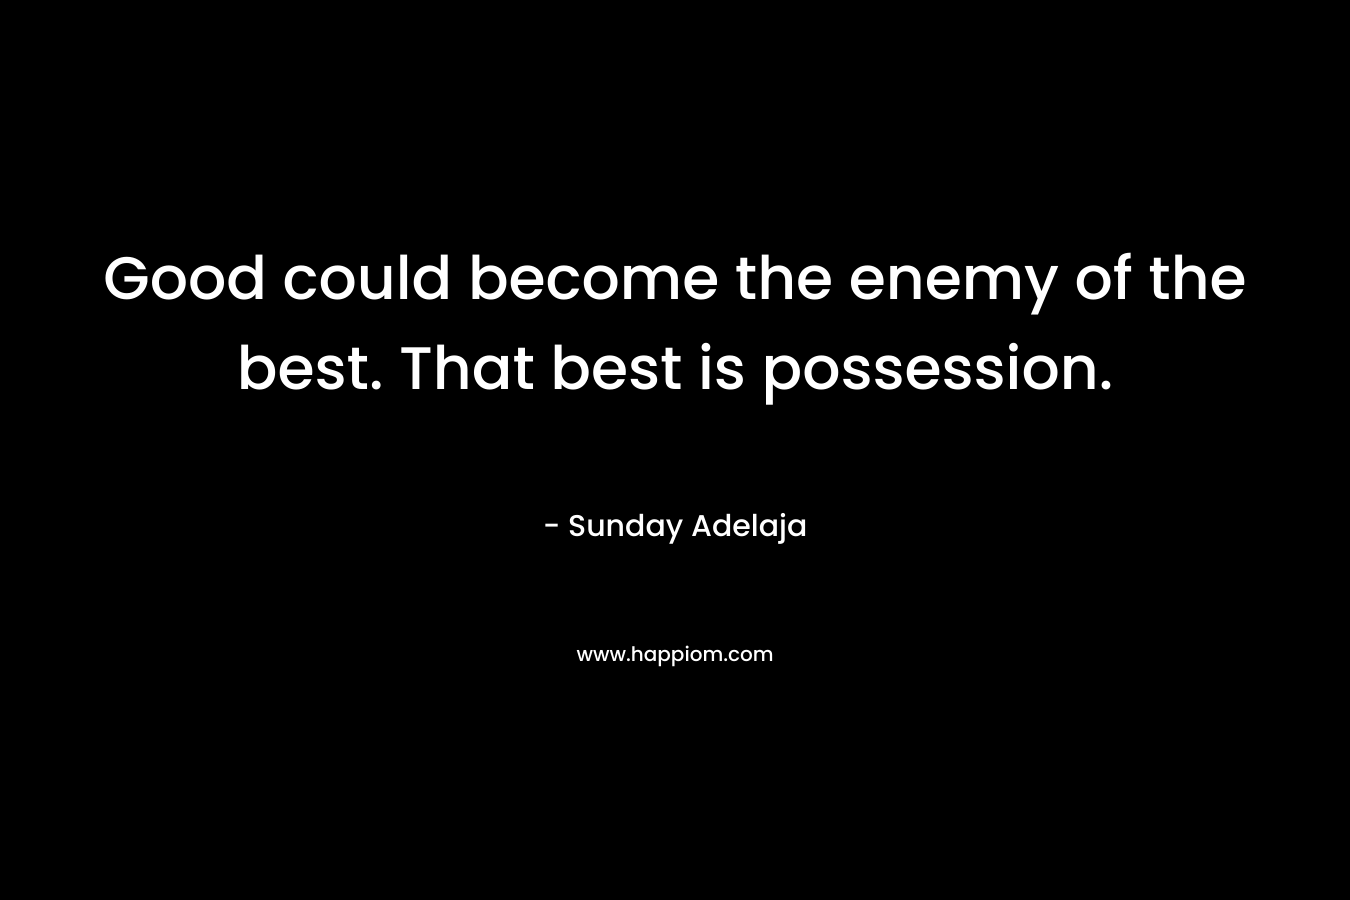 Good could become the enemy of the best. That best is possession.